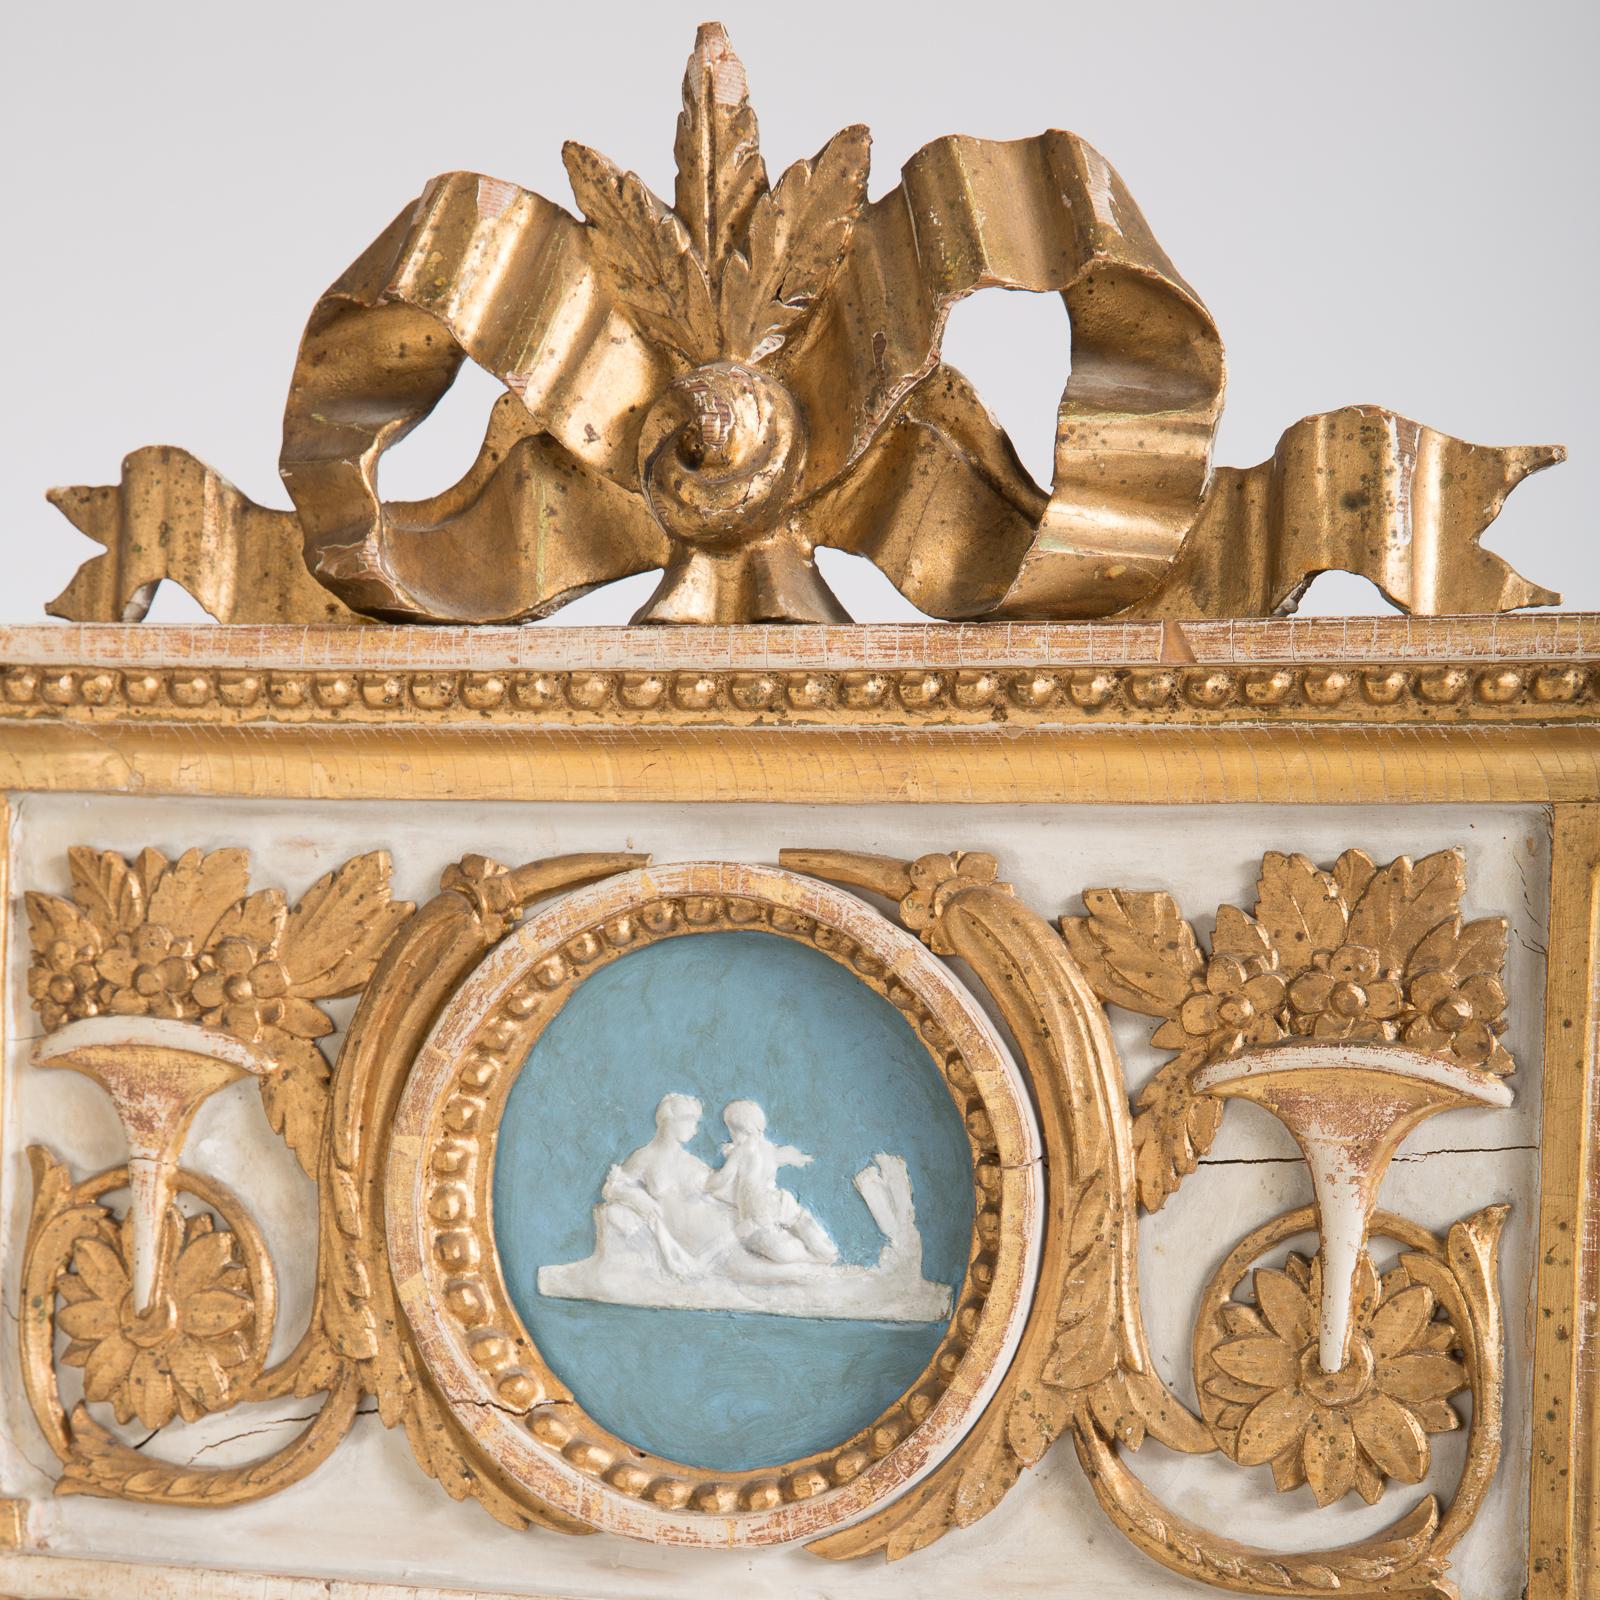 This elegant mirror from the Gustavian period has the old divided glass and gilt ornamentation of flowers in a trumpet vase on a white ground topped with a gilt bow. The bottom panel shows a row of carved pineapples. The center medallion on a blue